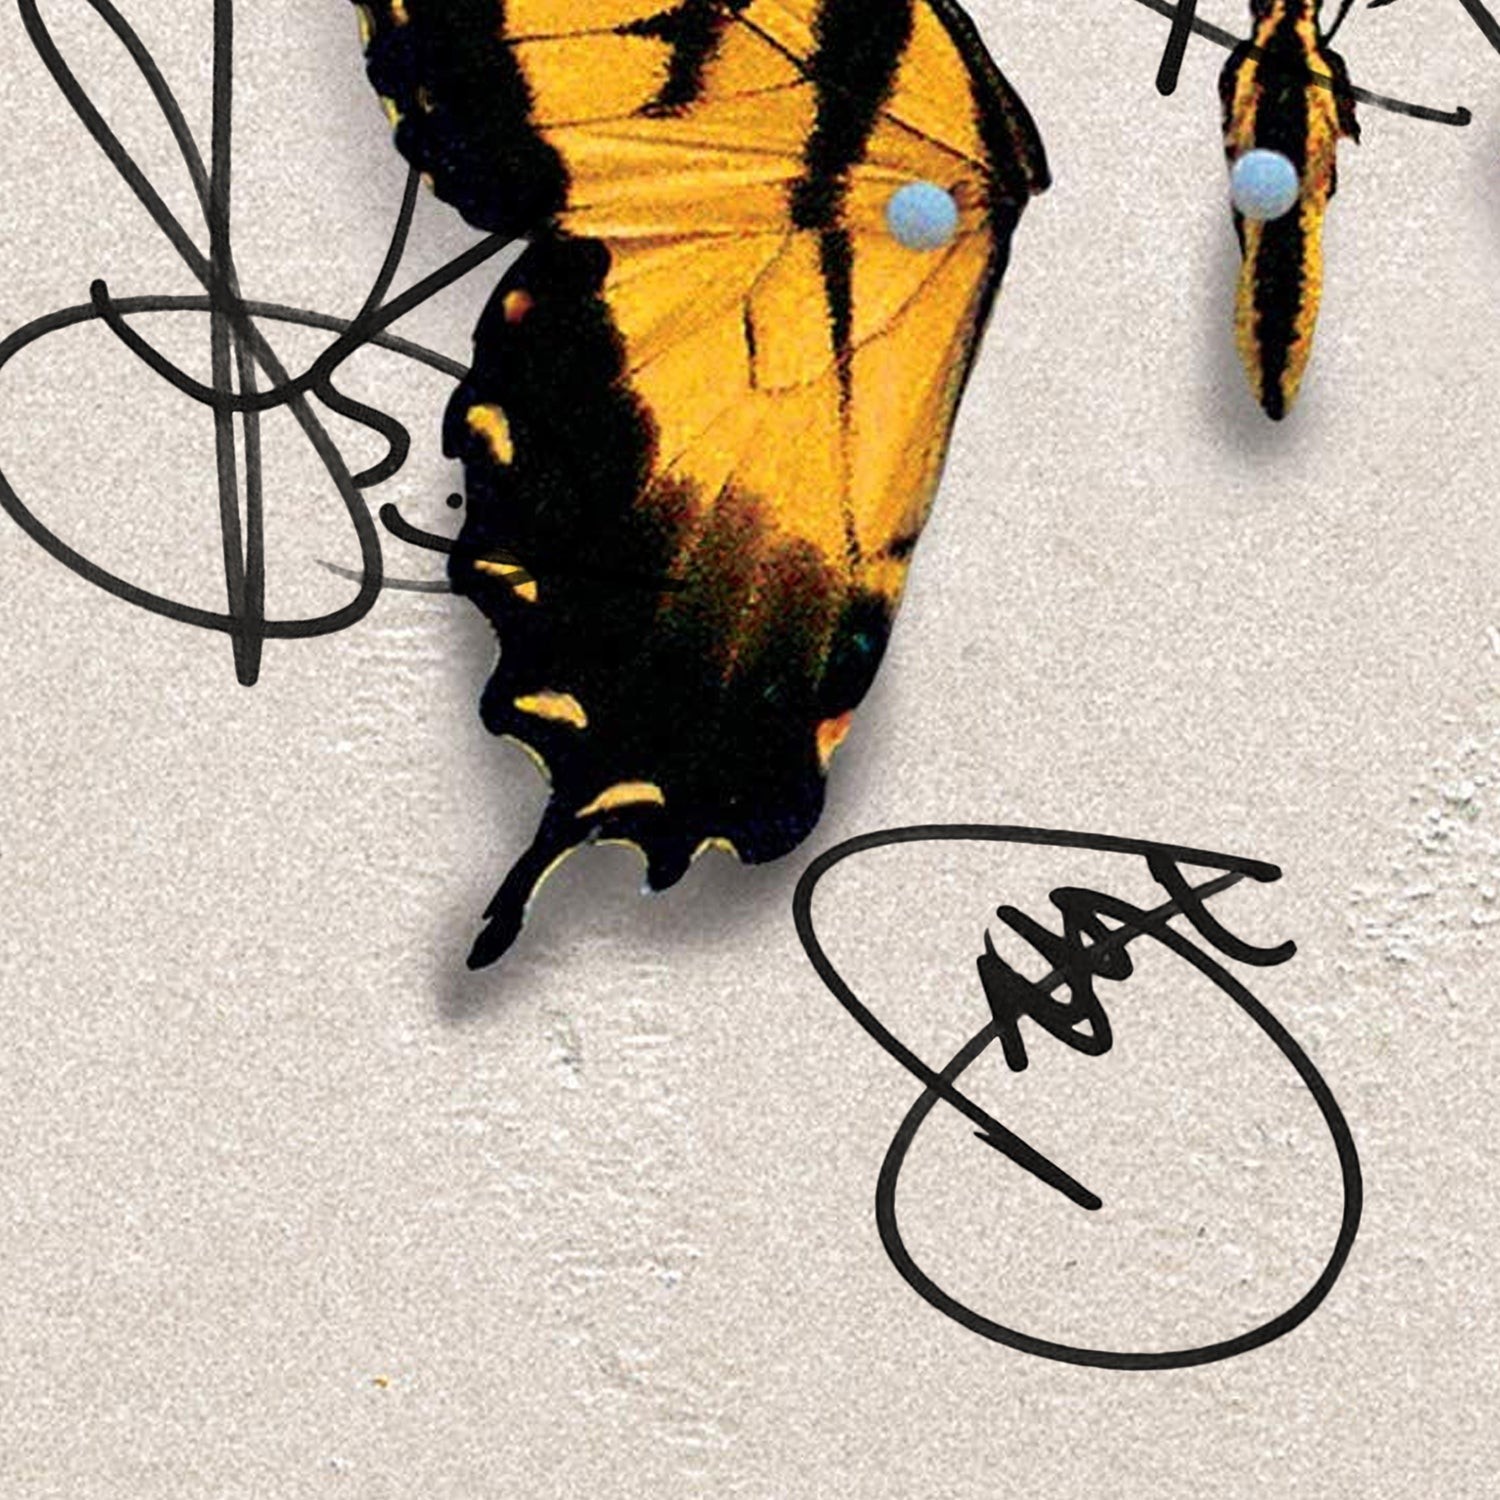 Paramore - Brand New Eyes LP Cover Limited Signature Edition